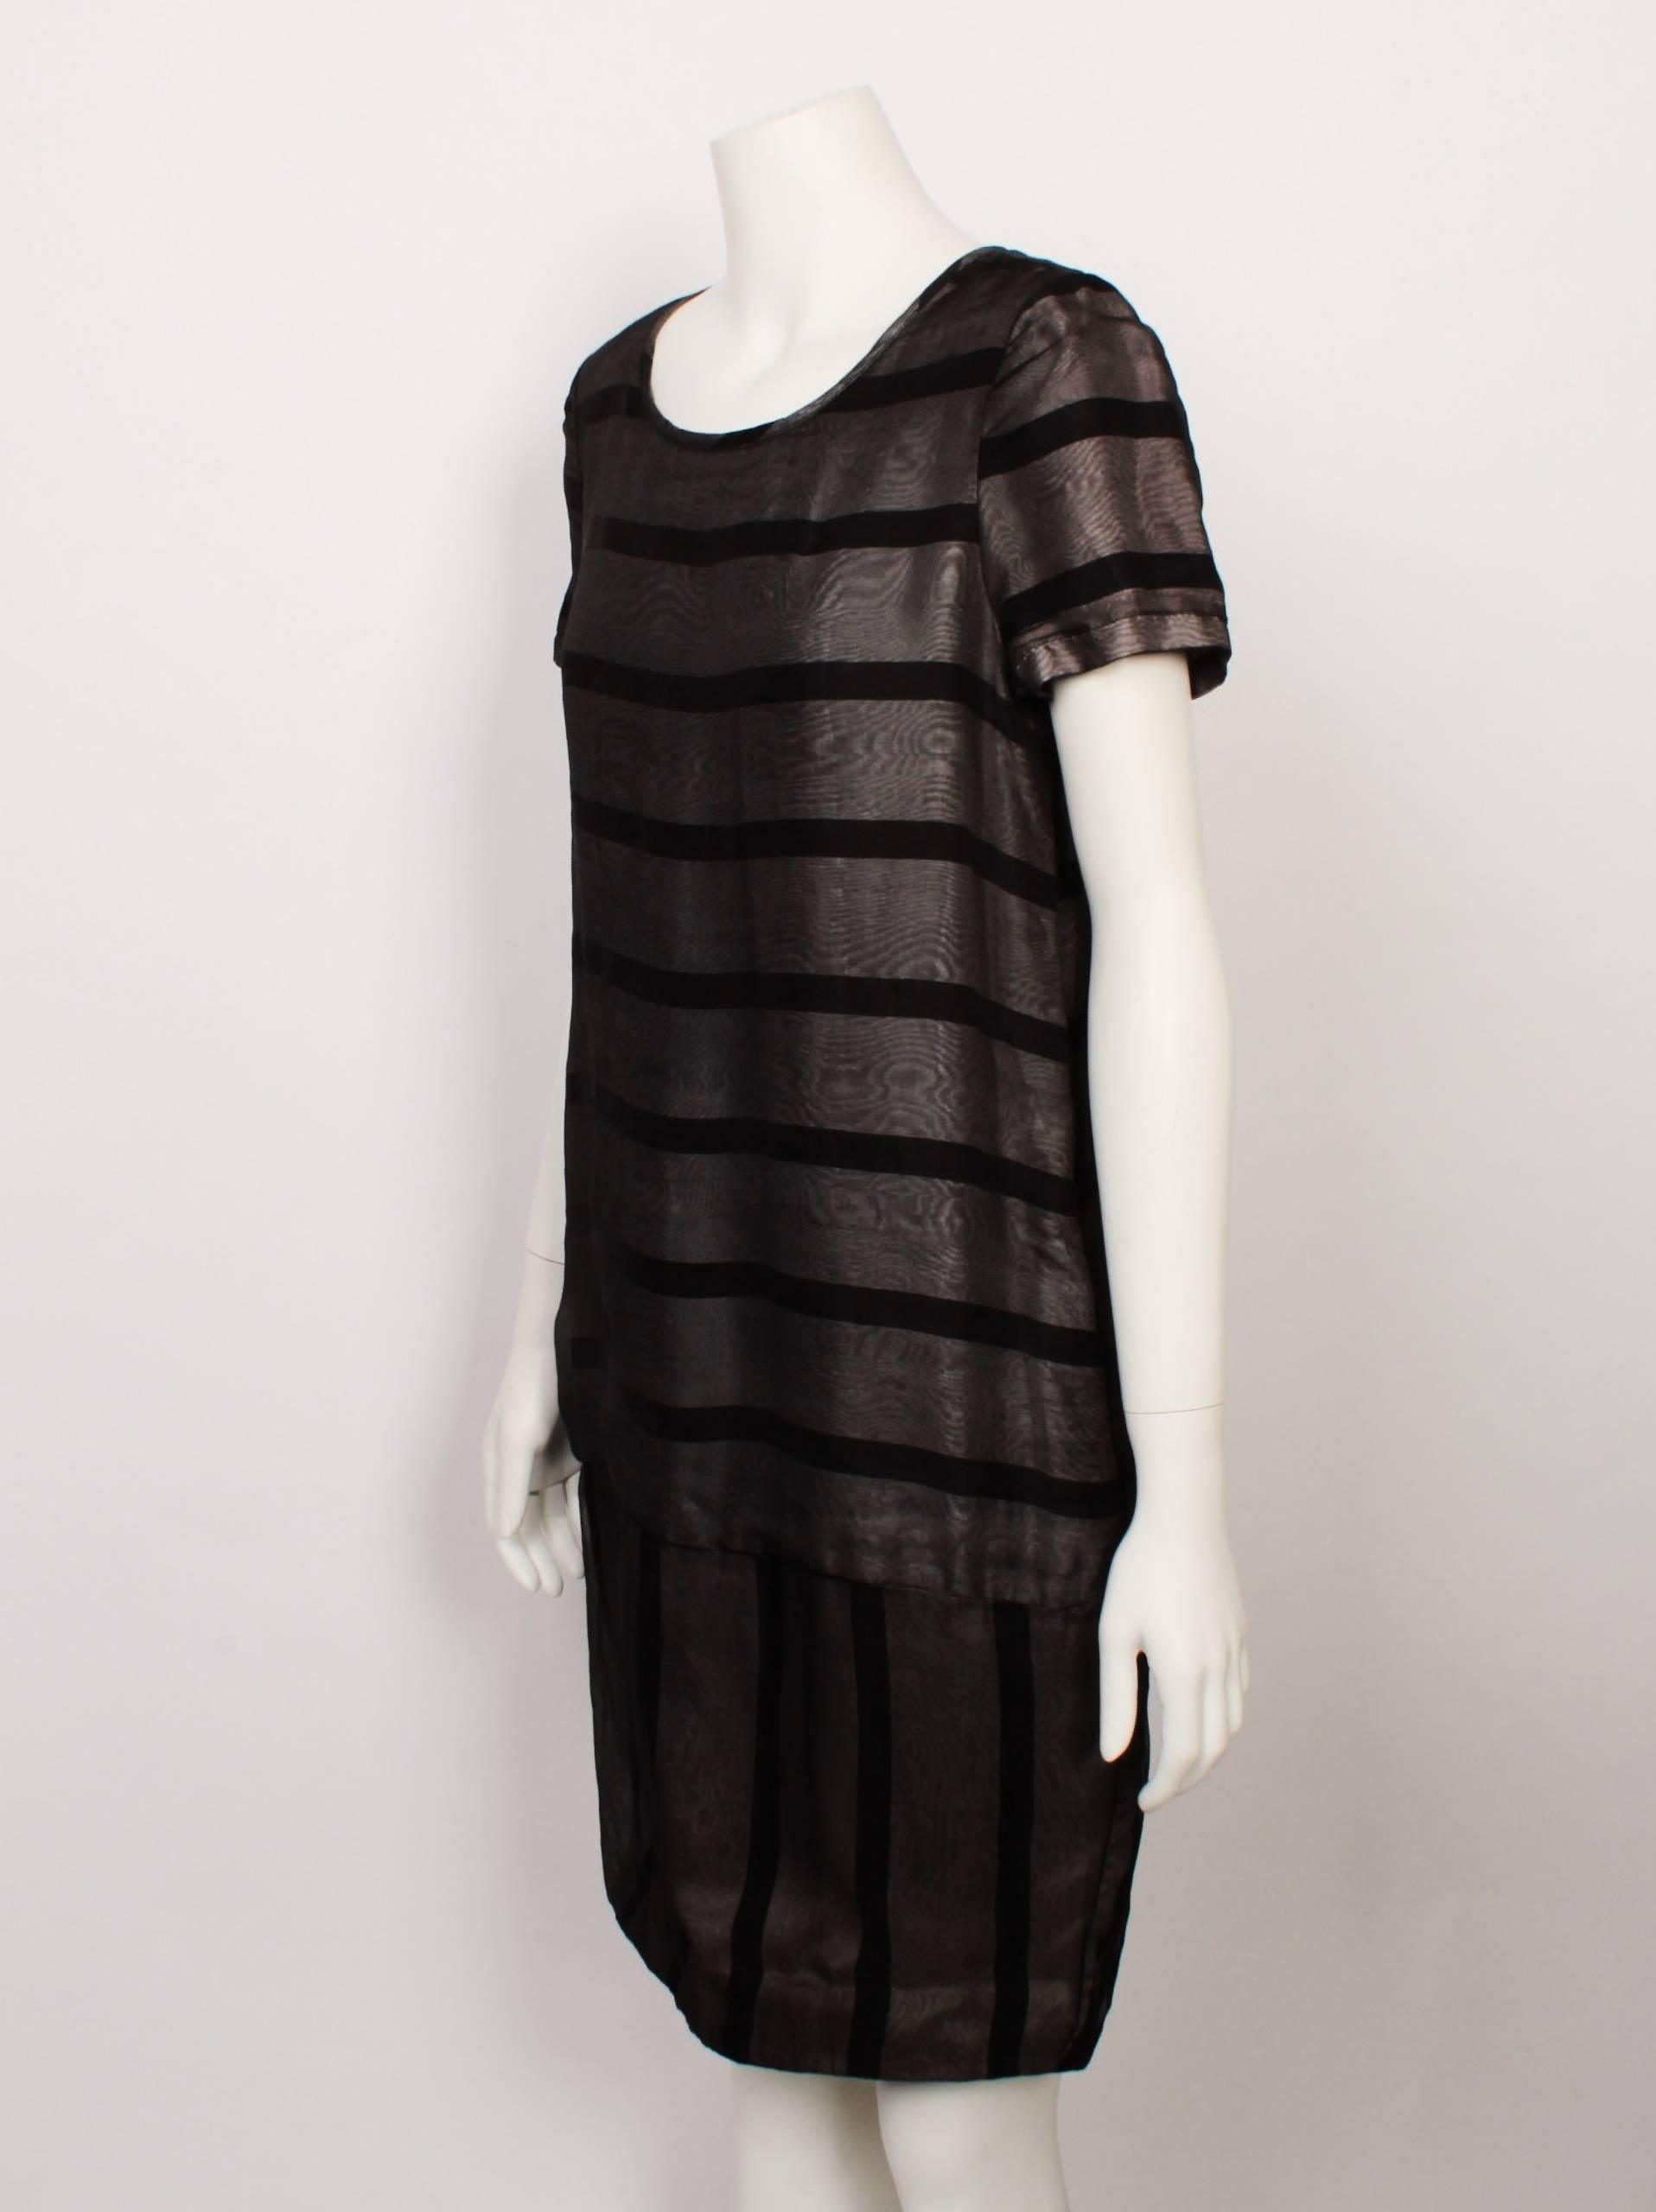 Alexander McQueen striped organza shift dress features a scooped neckline and a short sleeve.
 Sheer organza overlay is mounted over grey and black striped base fabric. Stripes run horizontally across the main dress and vertically at the hem panel.